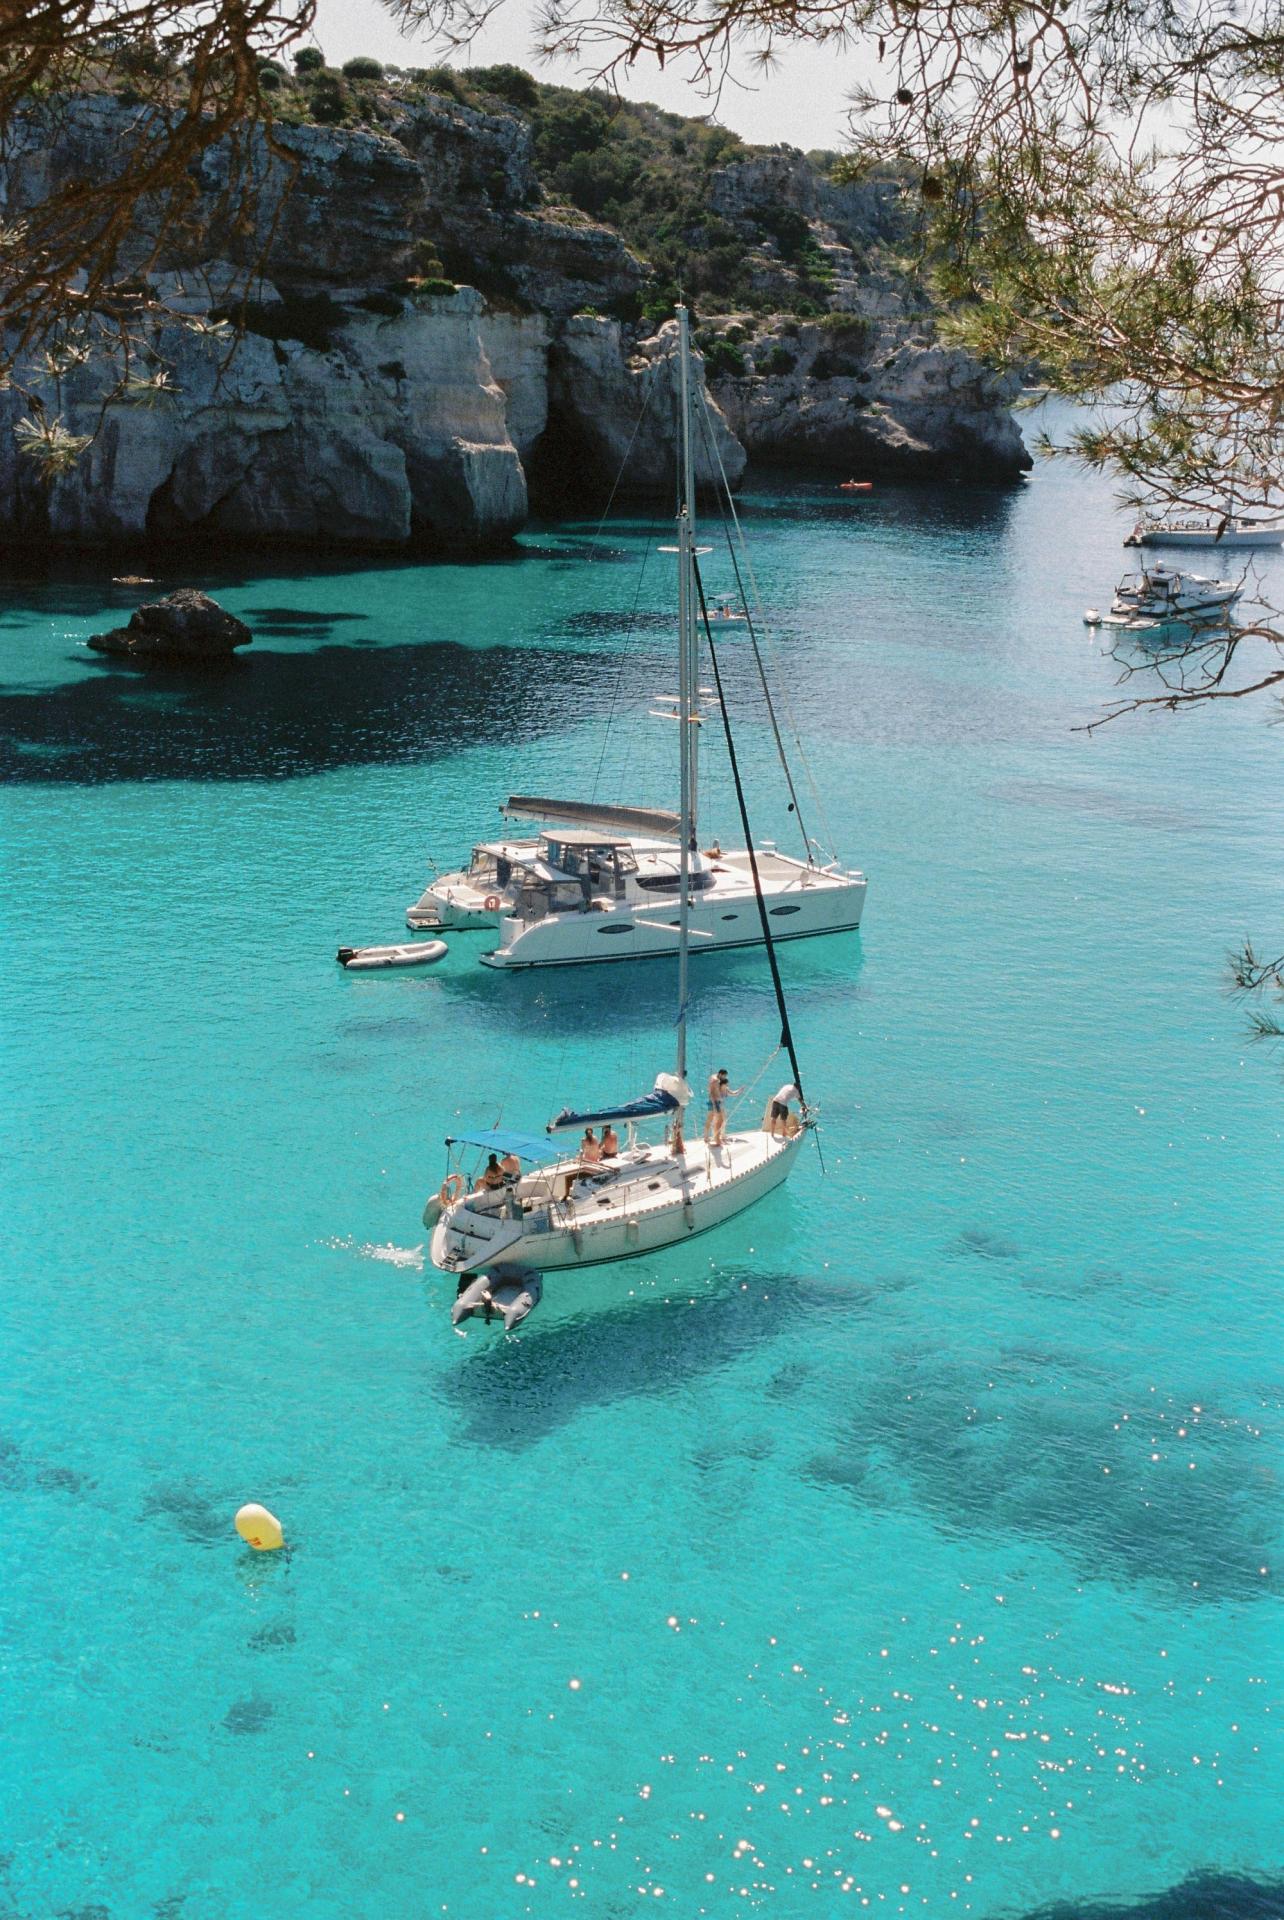 Boats in turquoise water in Menorca